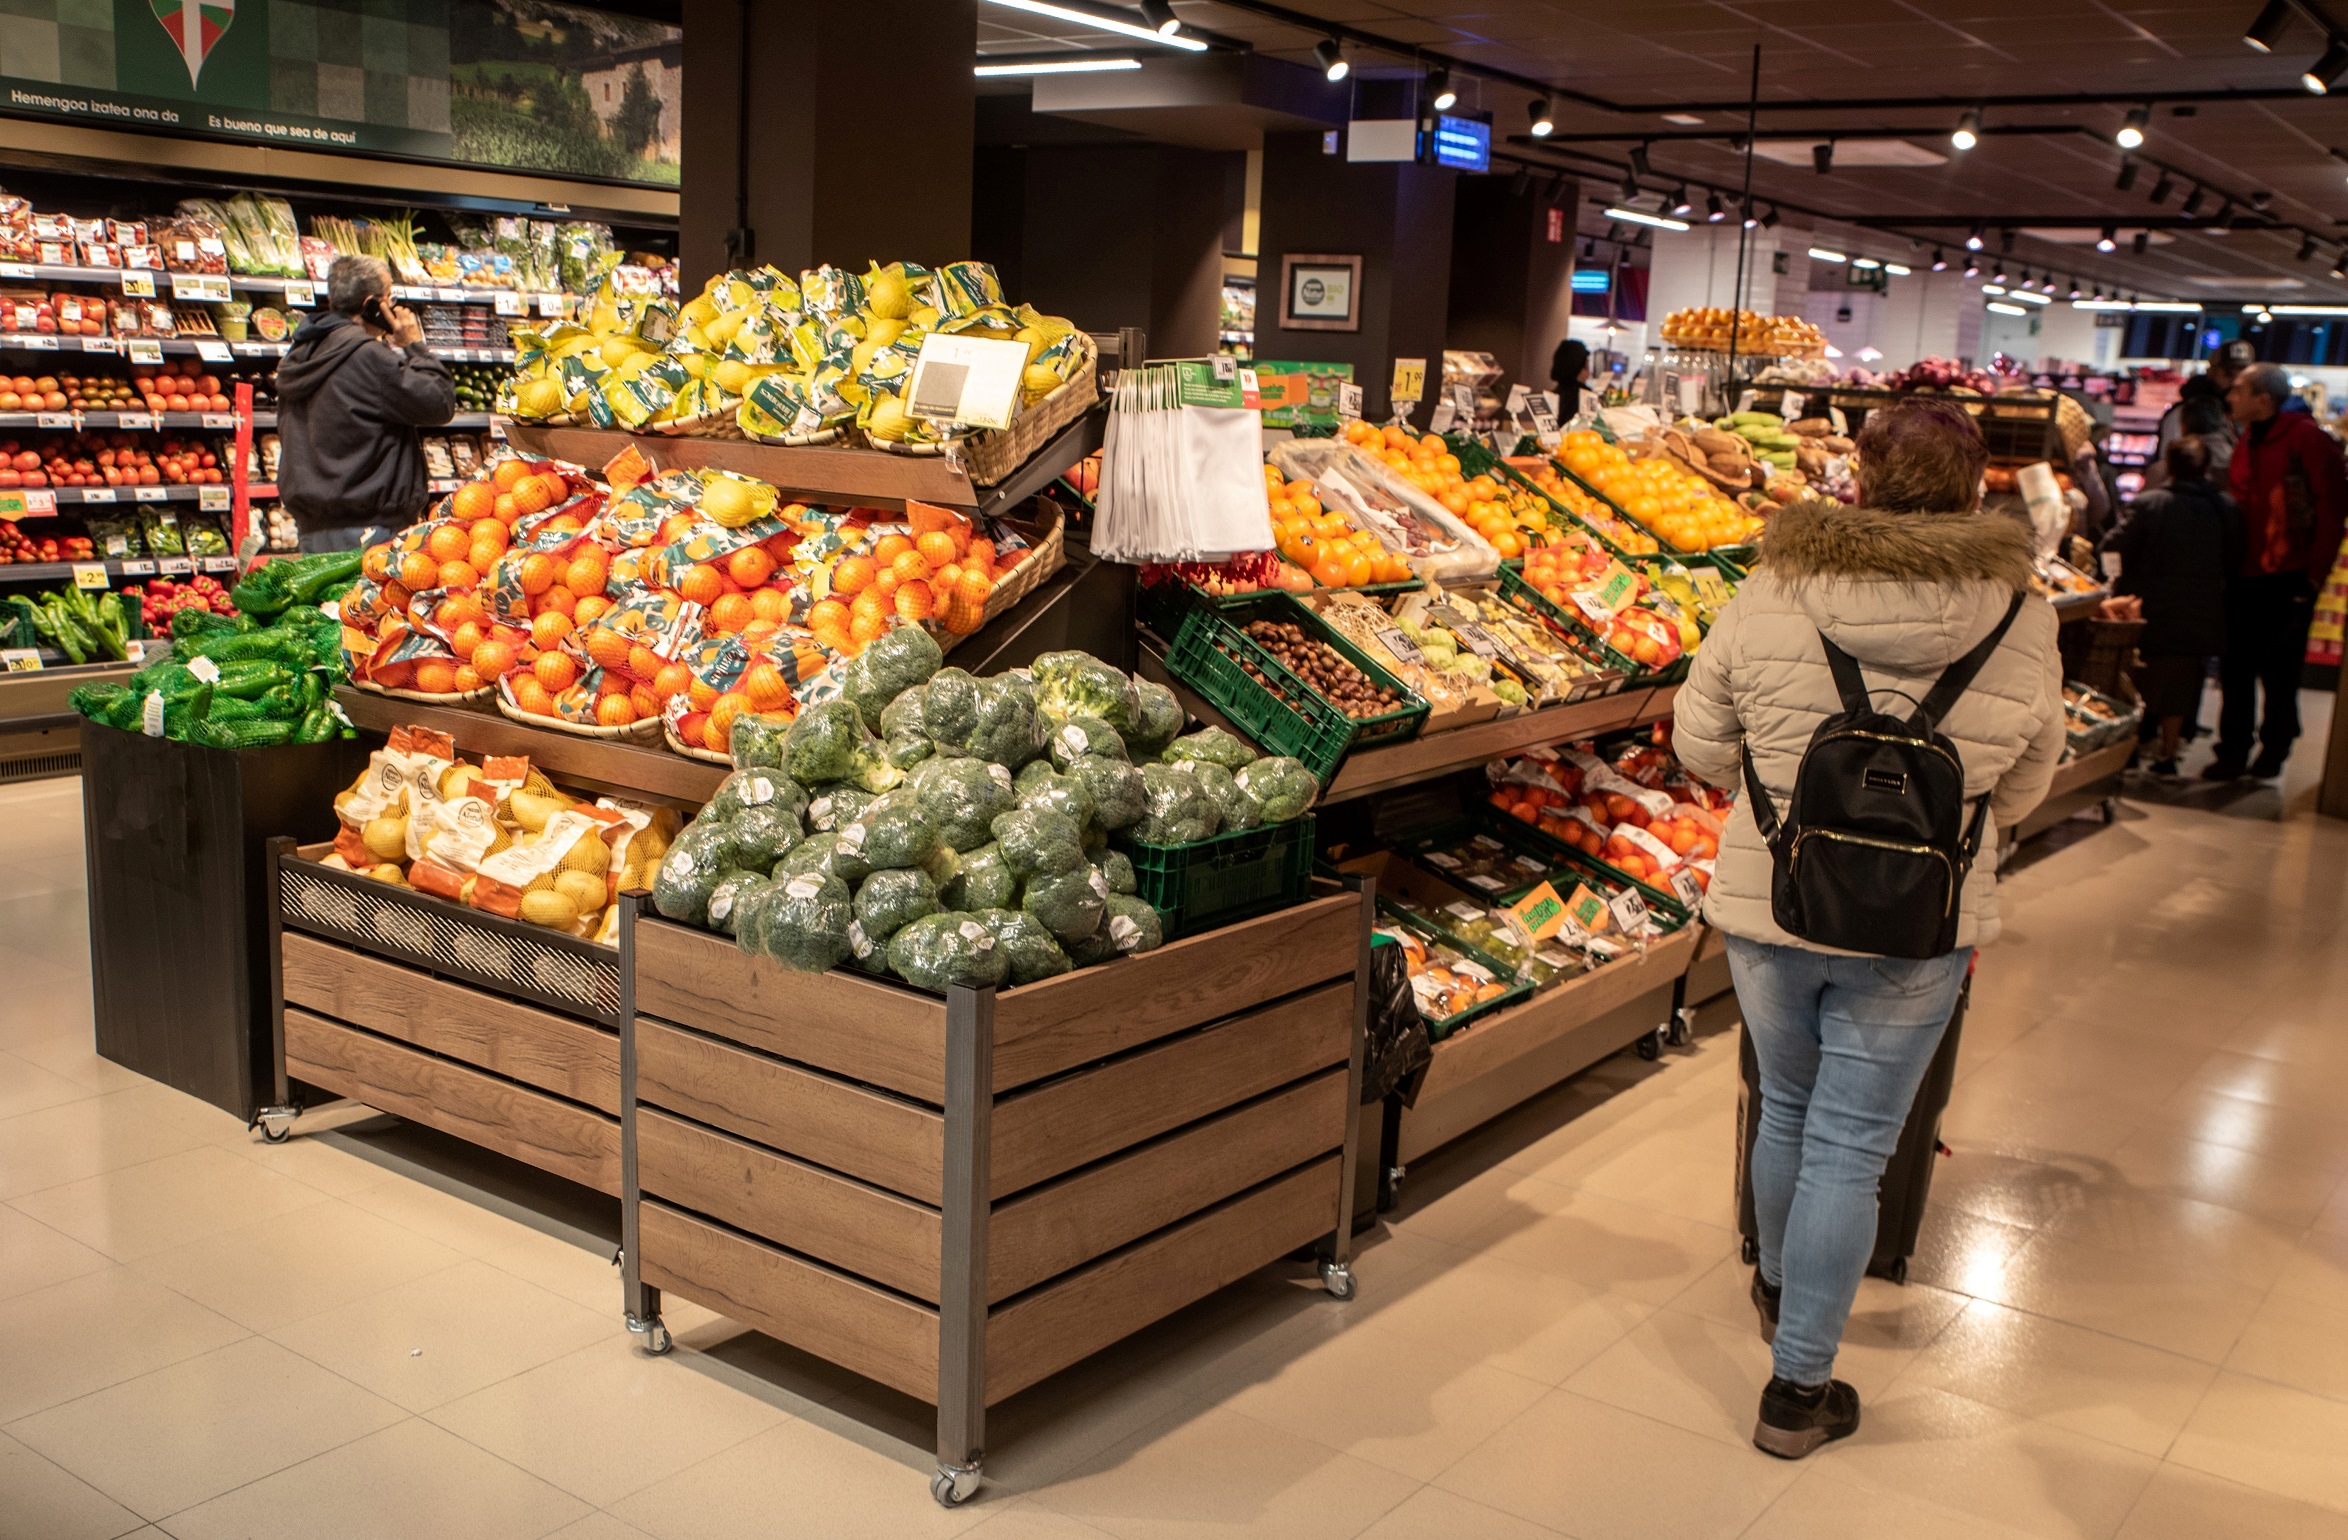 Spaniards’ consumption of fresh fruit and veg continues to drop